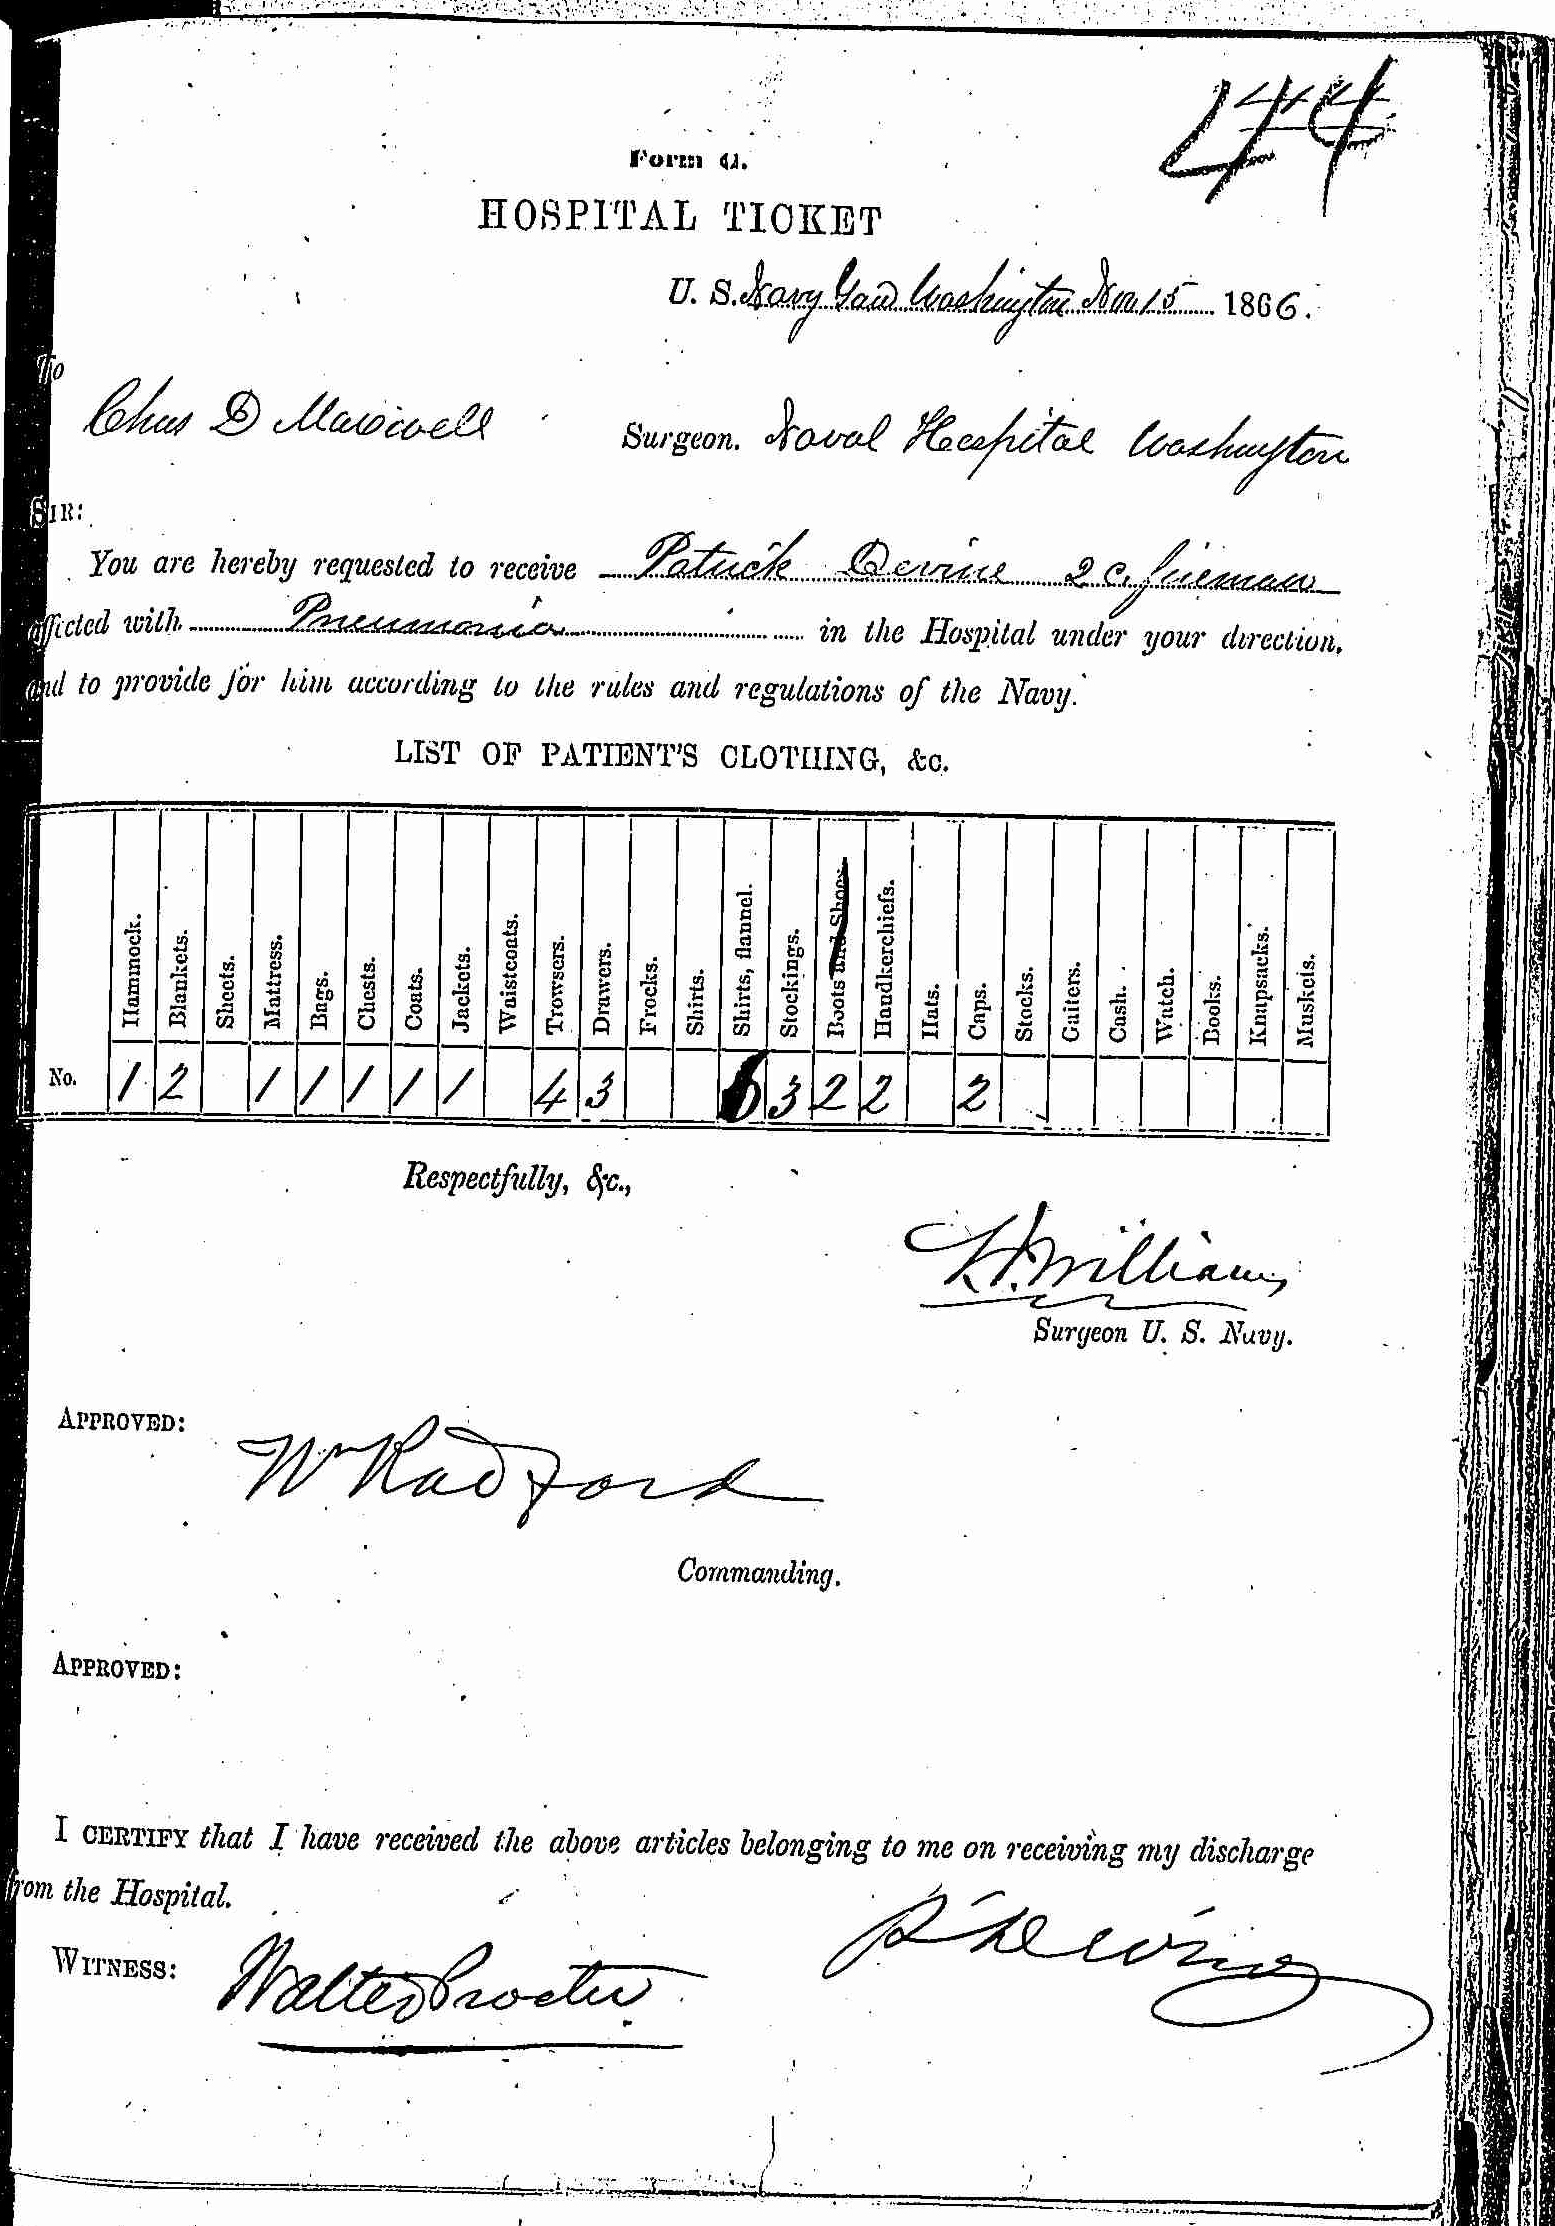 Entry for Patrick Devine (first admission page 1 of 2) in the log Hospital Tickets and Case Papers - Naval Hospital - Washington, D.C. - 1865-68